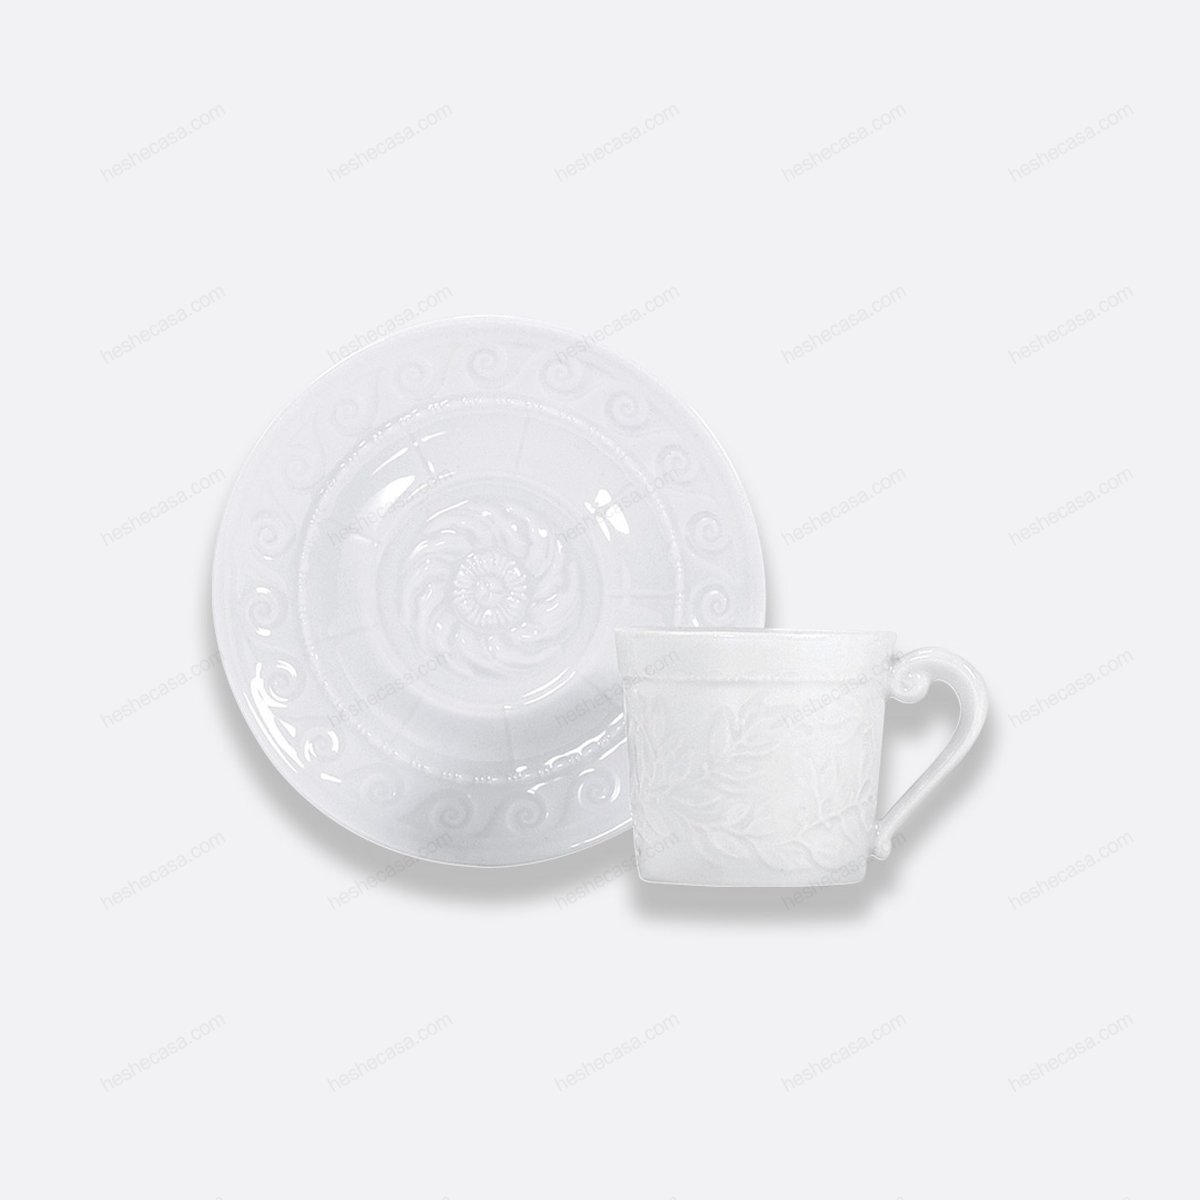 Louvre Espresso Cup And Saucer 咖啡杯套装